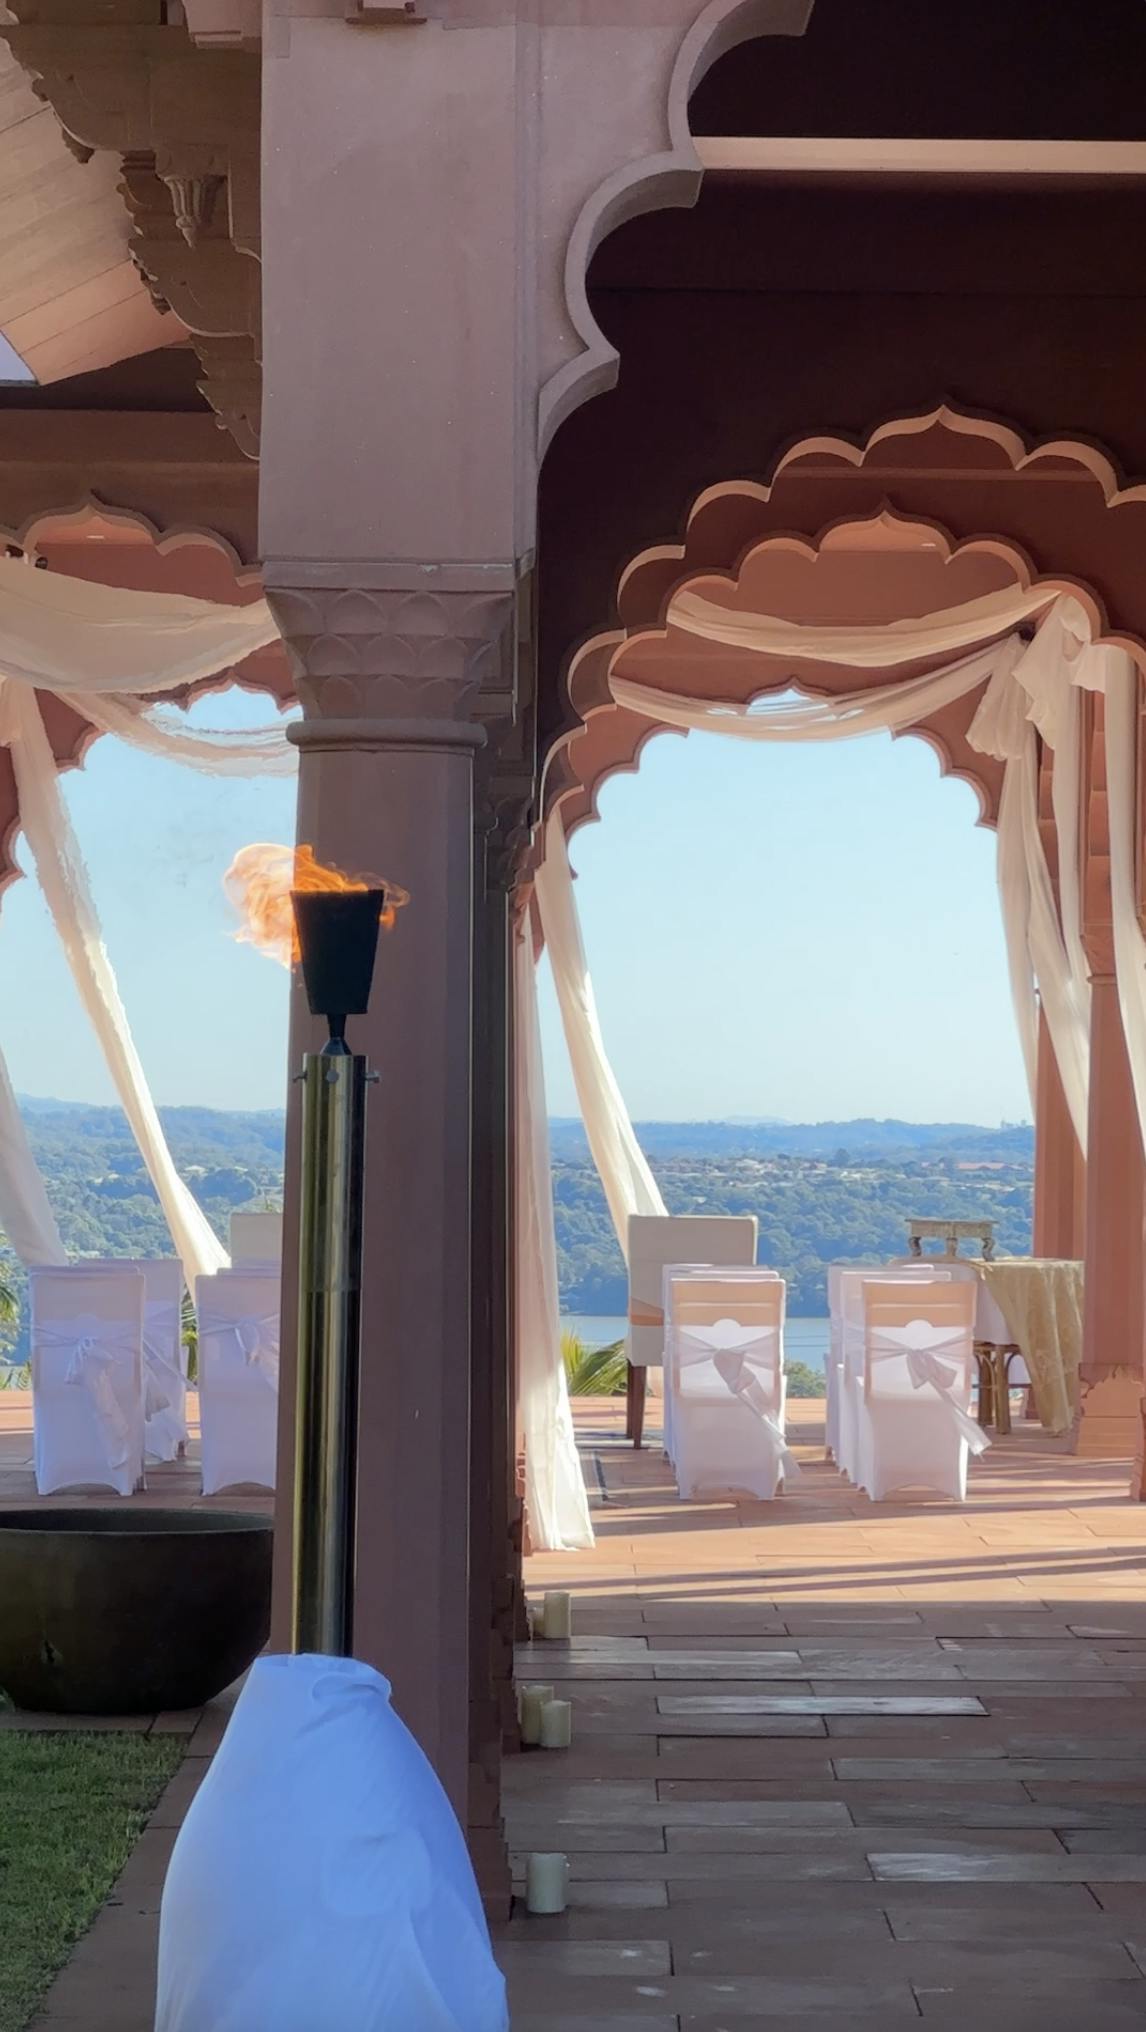 Incredible backdrop to any wedding in the Jodha Bai Retreat Entertaining area with Gold Coast in the background